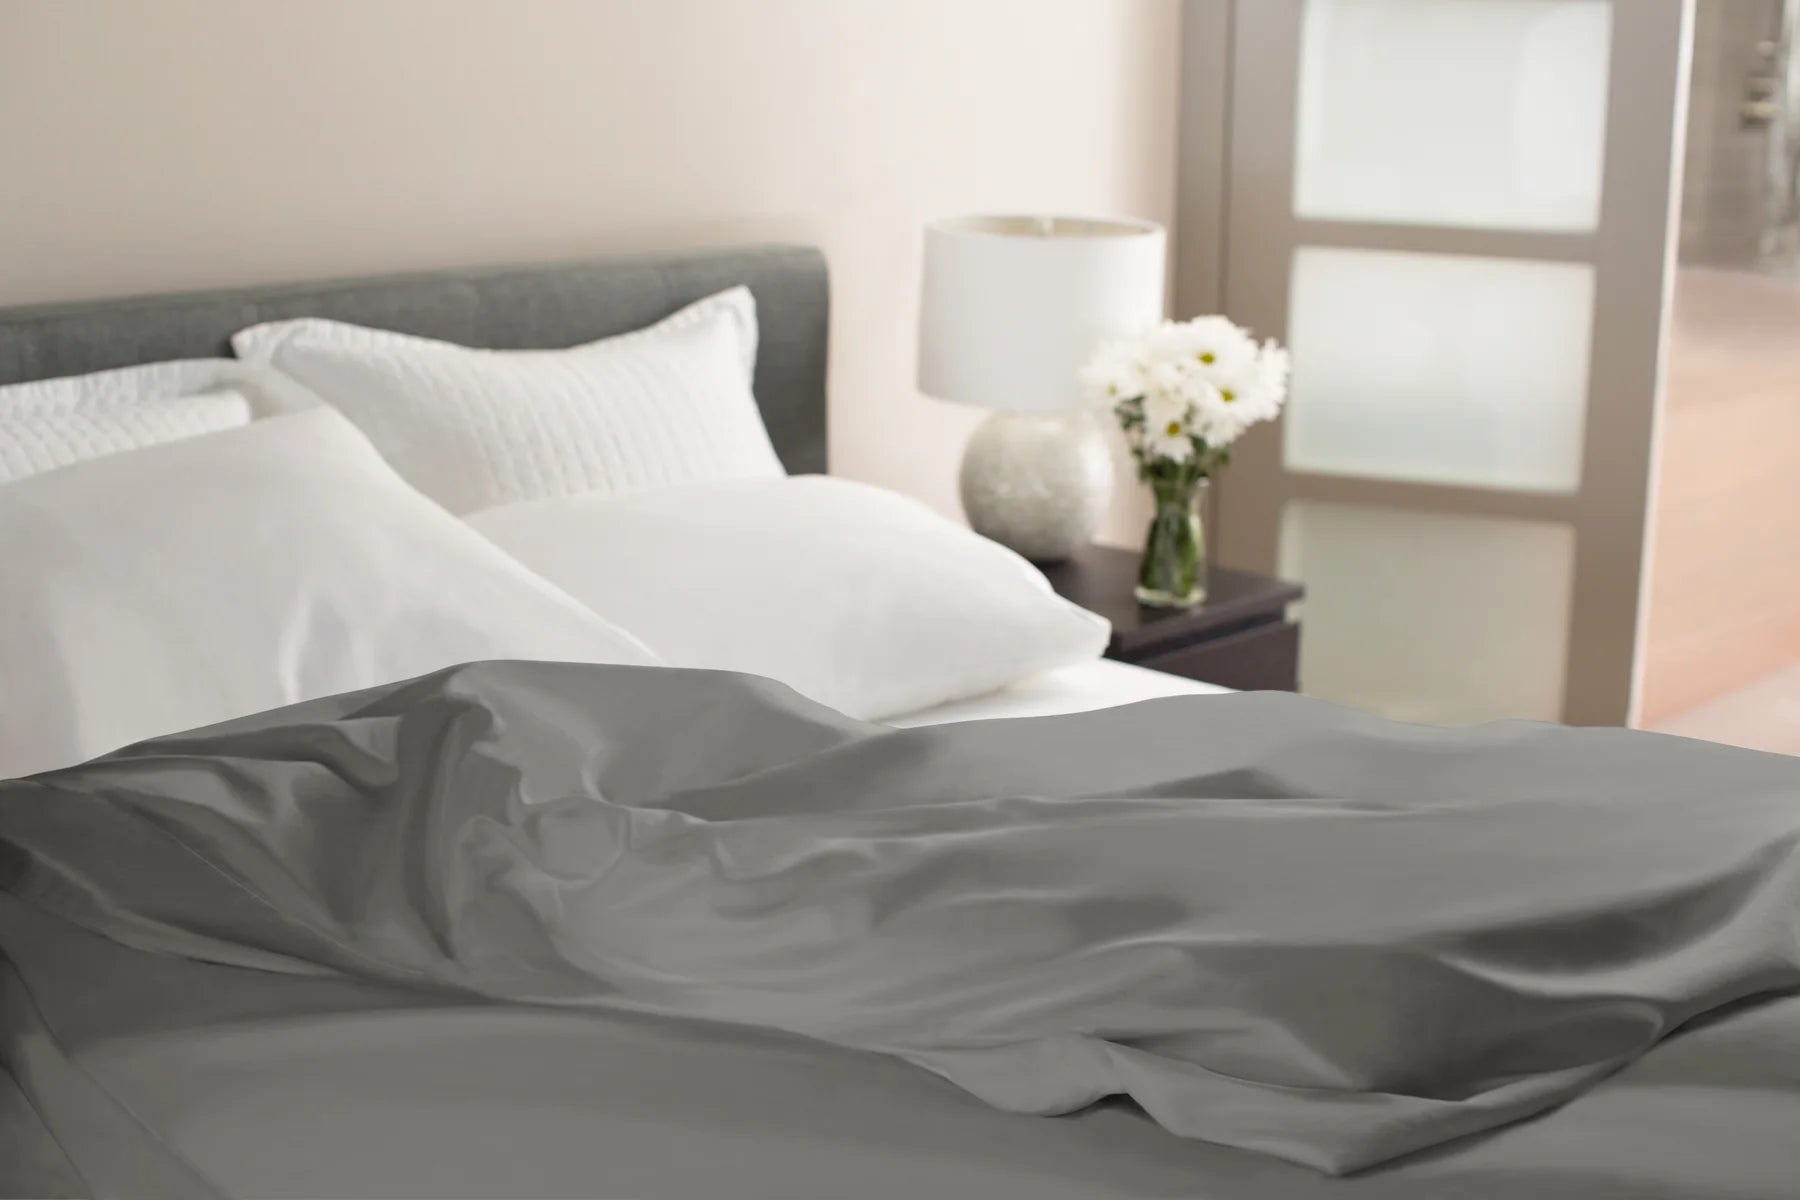 Duvet Cover | Comphy